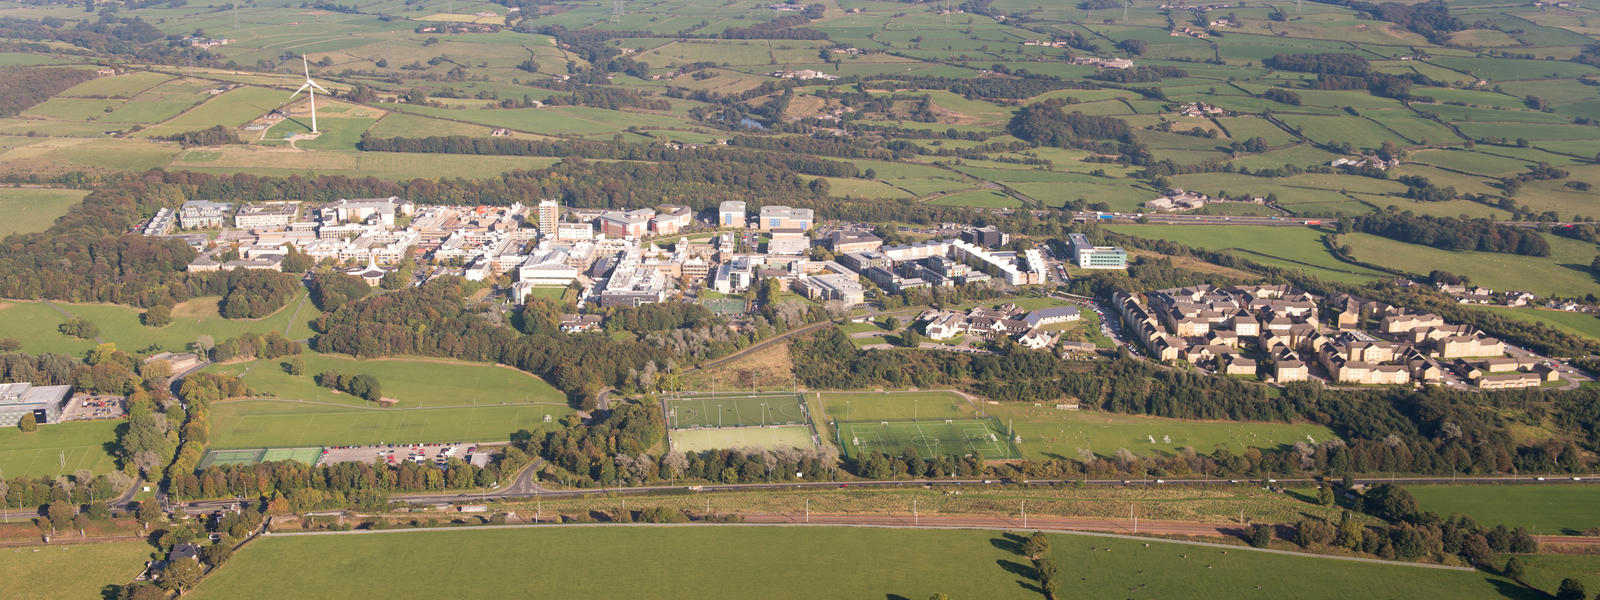 Lancaster University campus at Bailrigg photographed from the air